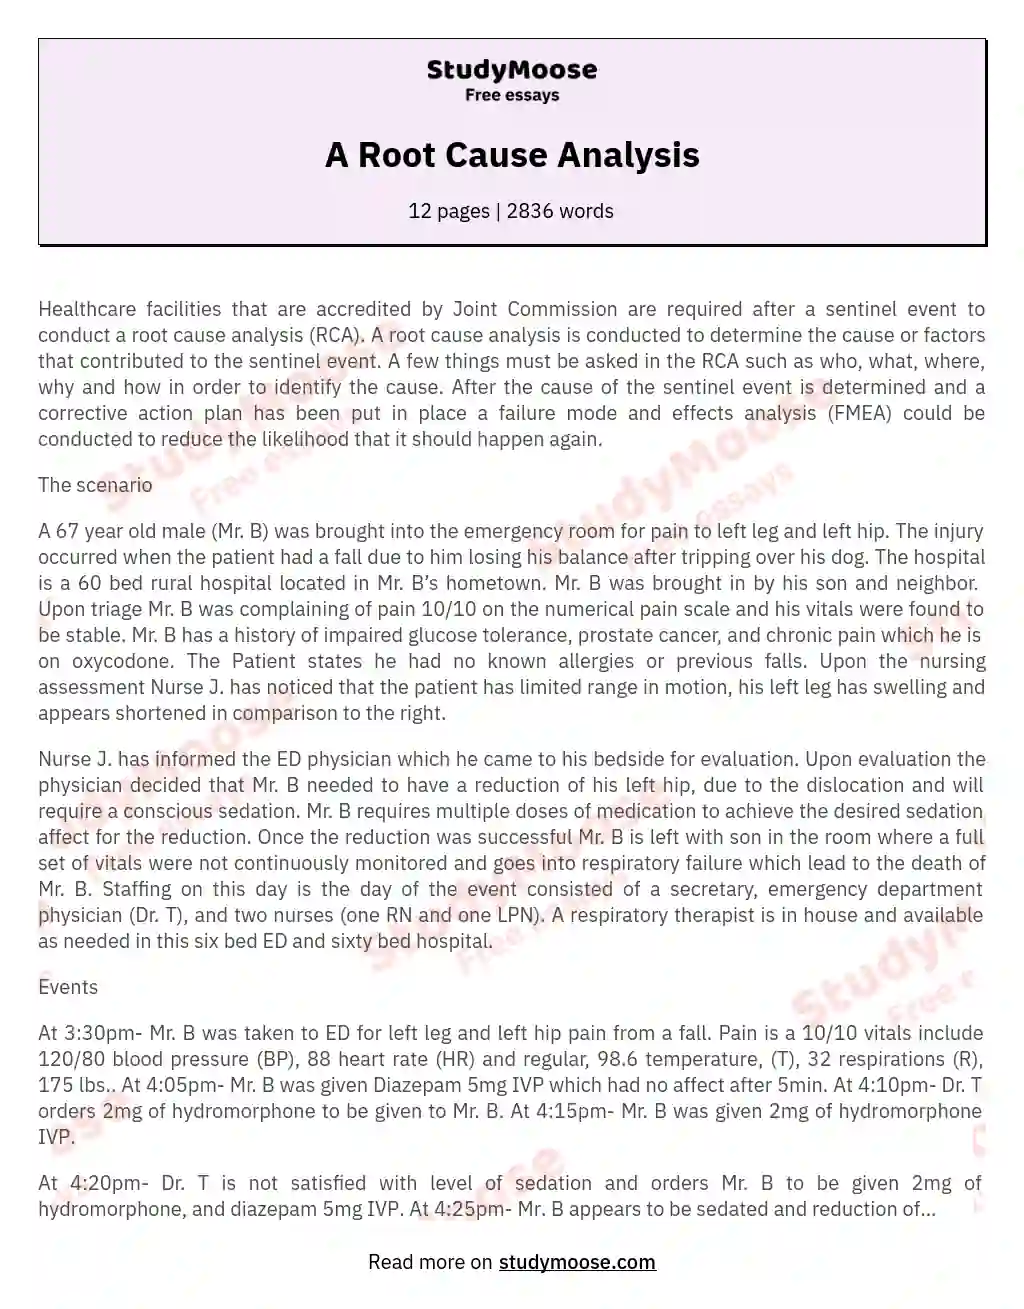 A Root Cause Analysis essay